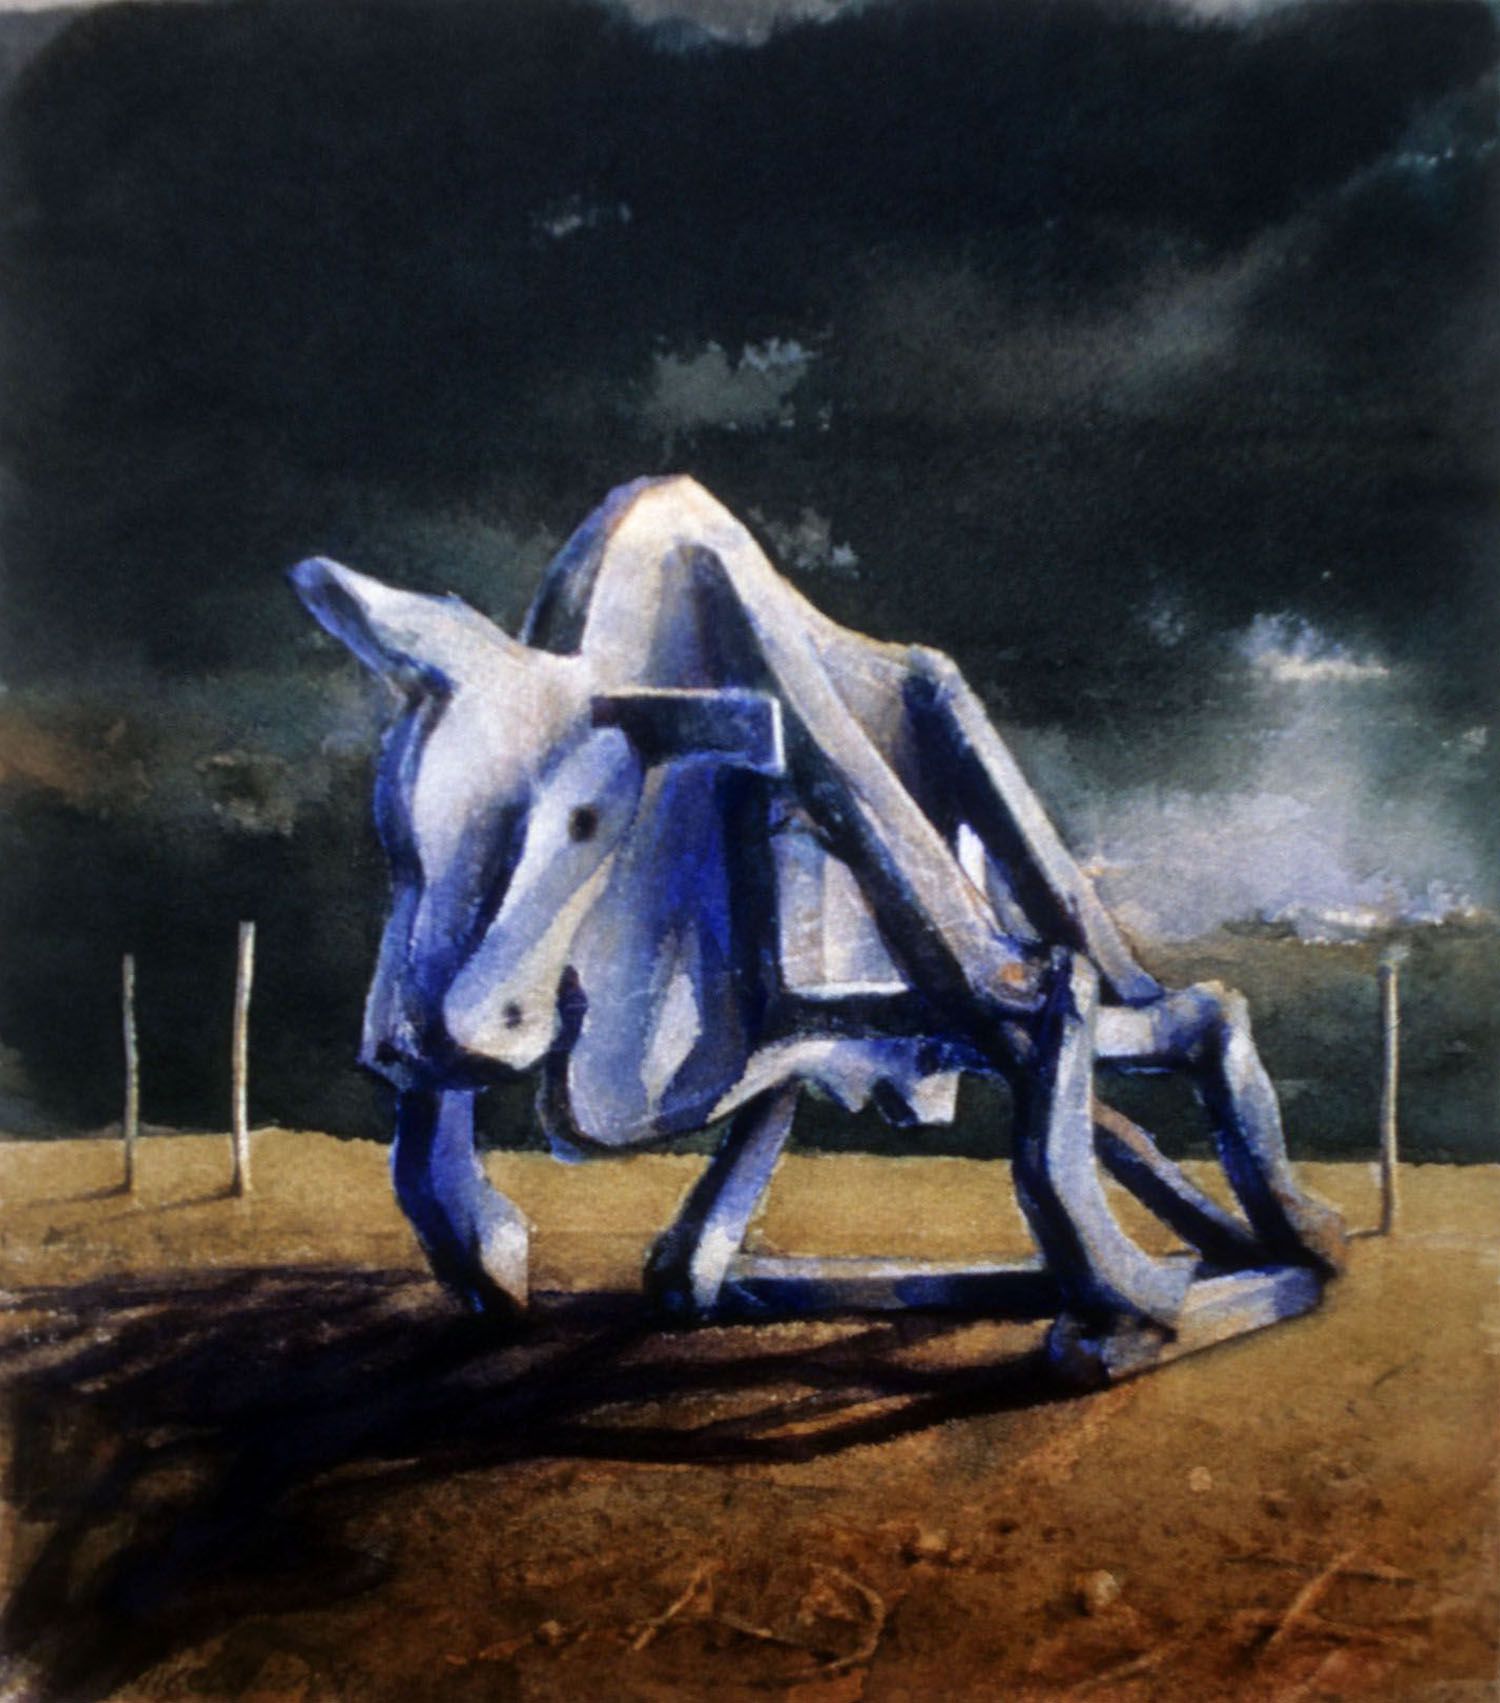 "The Chimera #2" (Bull with dark sky) 1997. Watercolour on 300gms Arches paper. 33.5 x 28.5cm